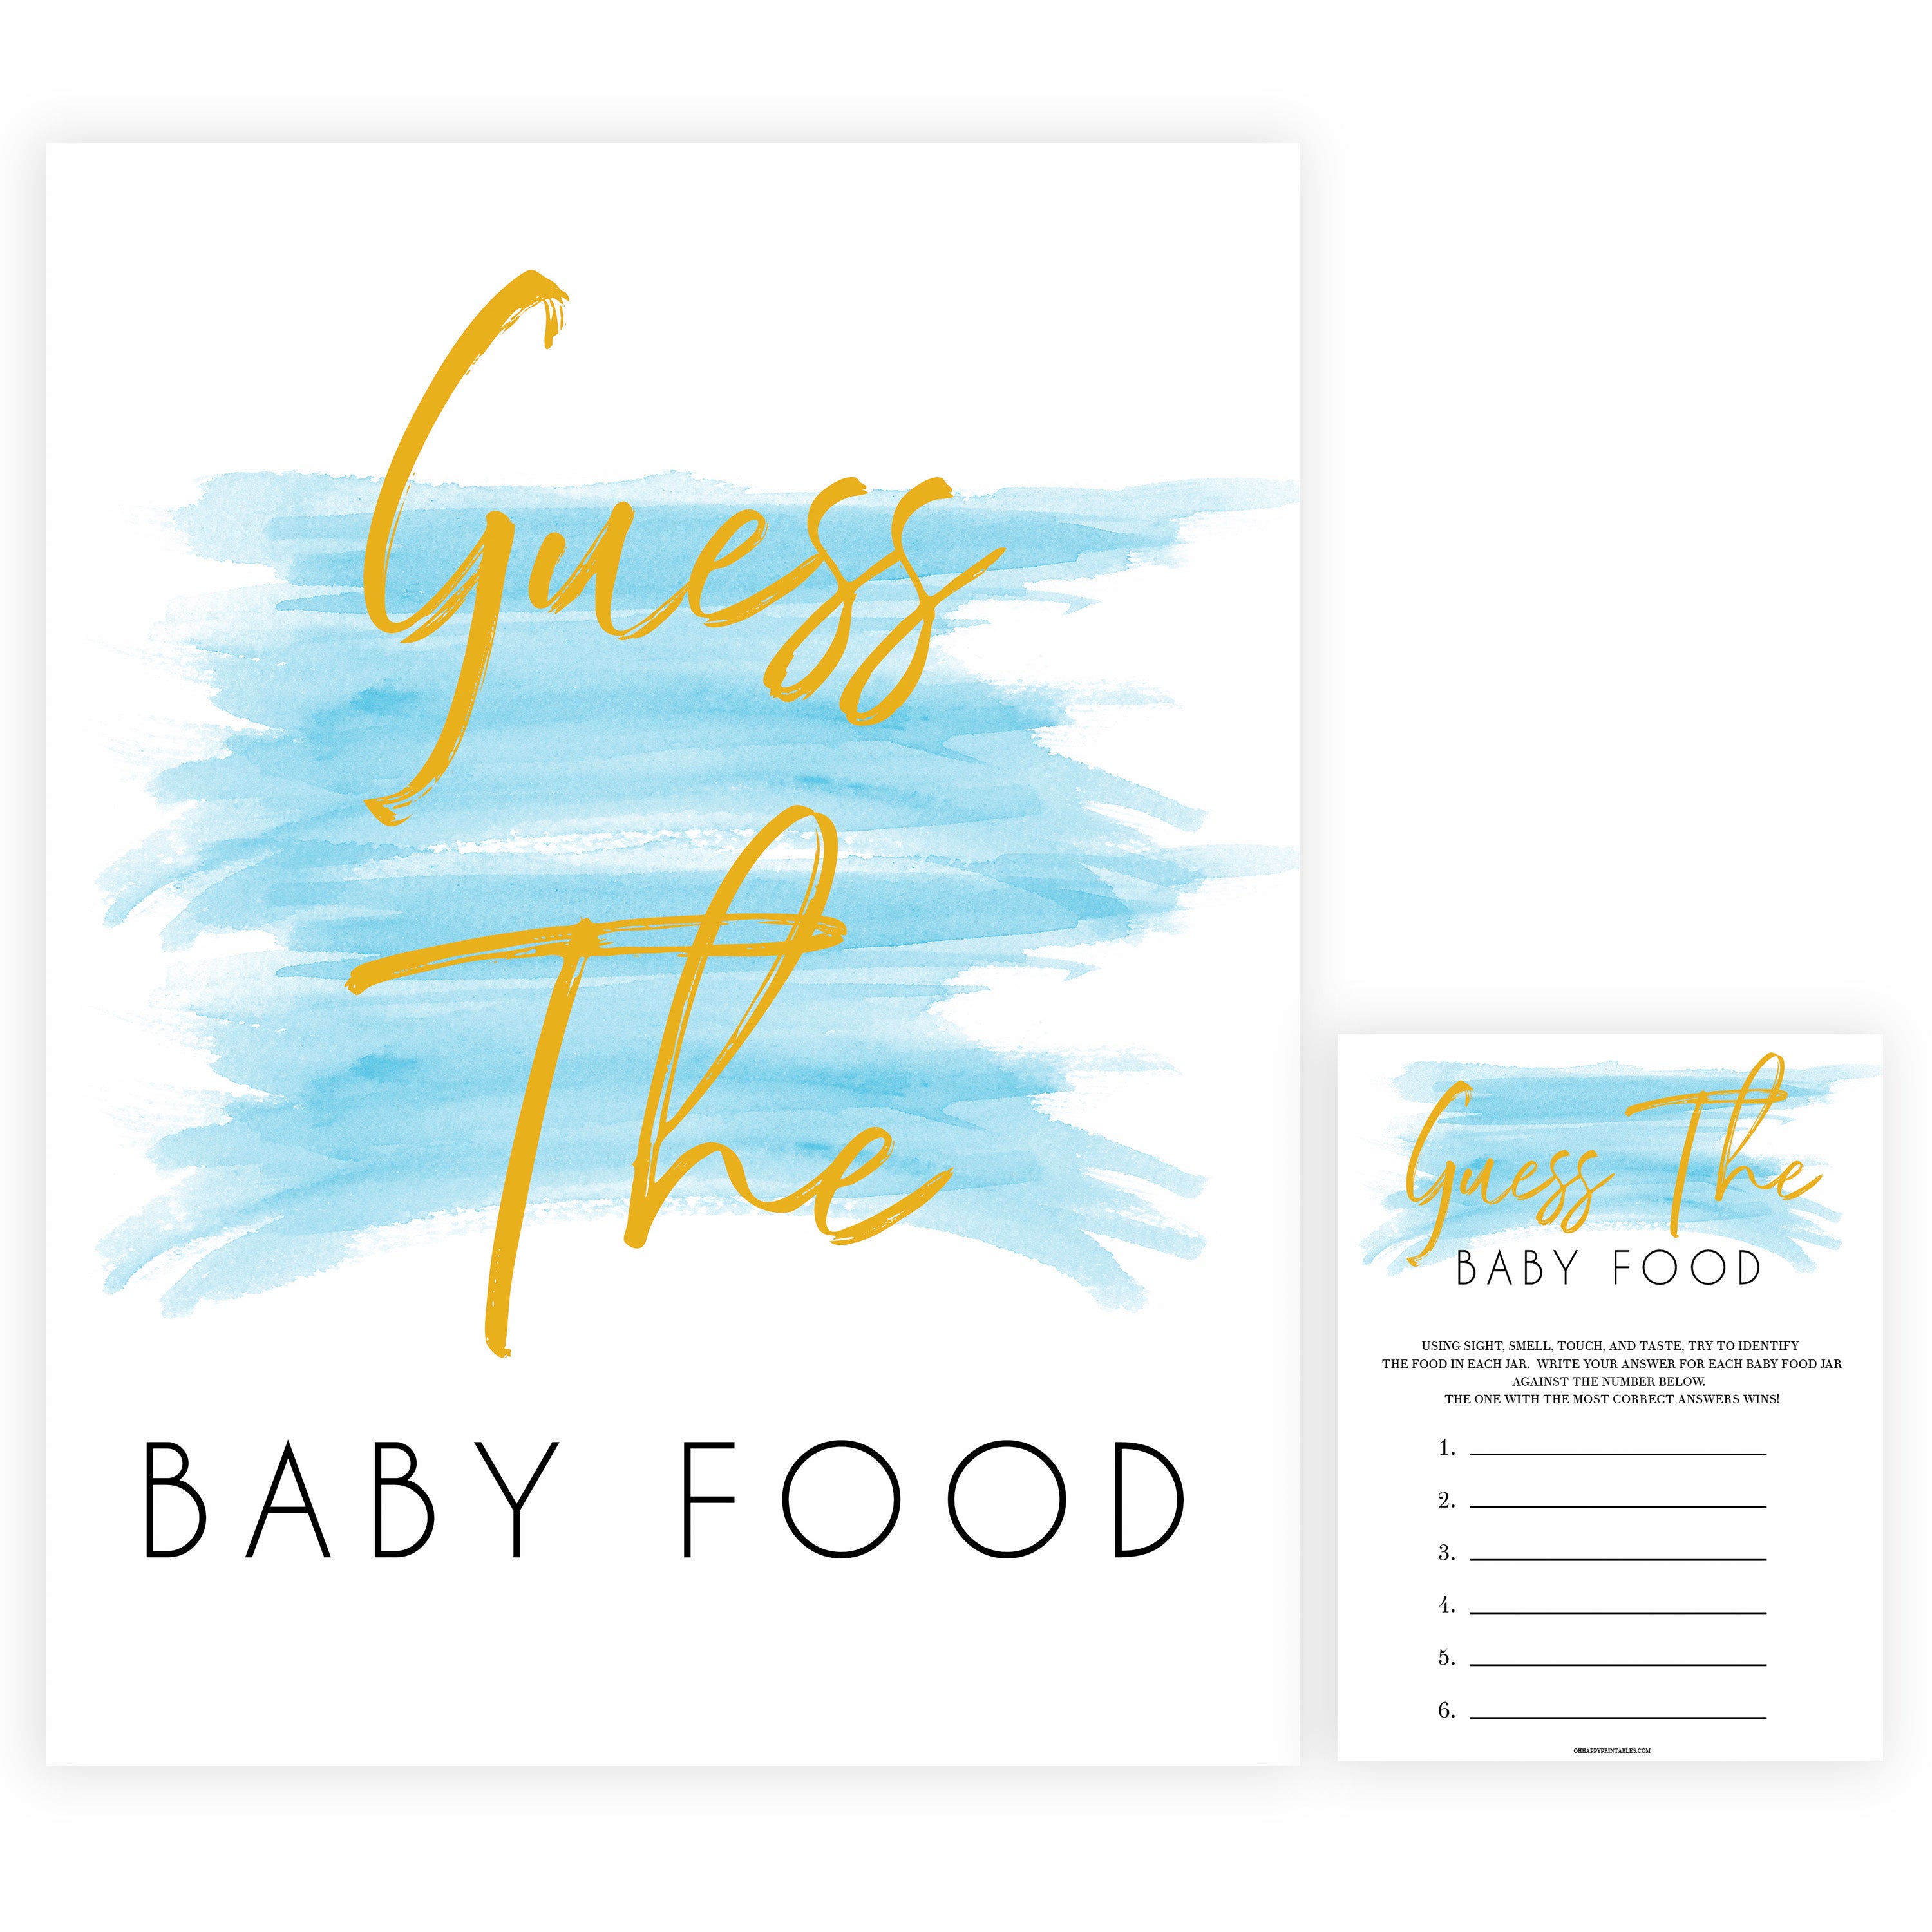 Blue swash, guess the baby food baby games, baby shower games, printable baby games, fun baby games, boy baby shower games, baby games, fun baby shower ideas, baby shower ideas, boy baby games, blue baby shower